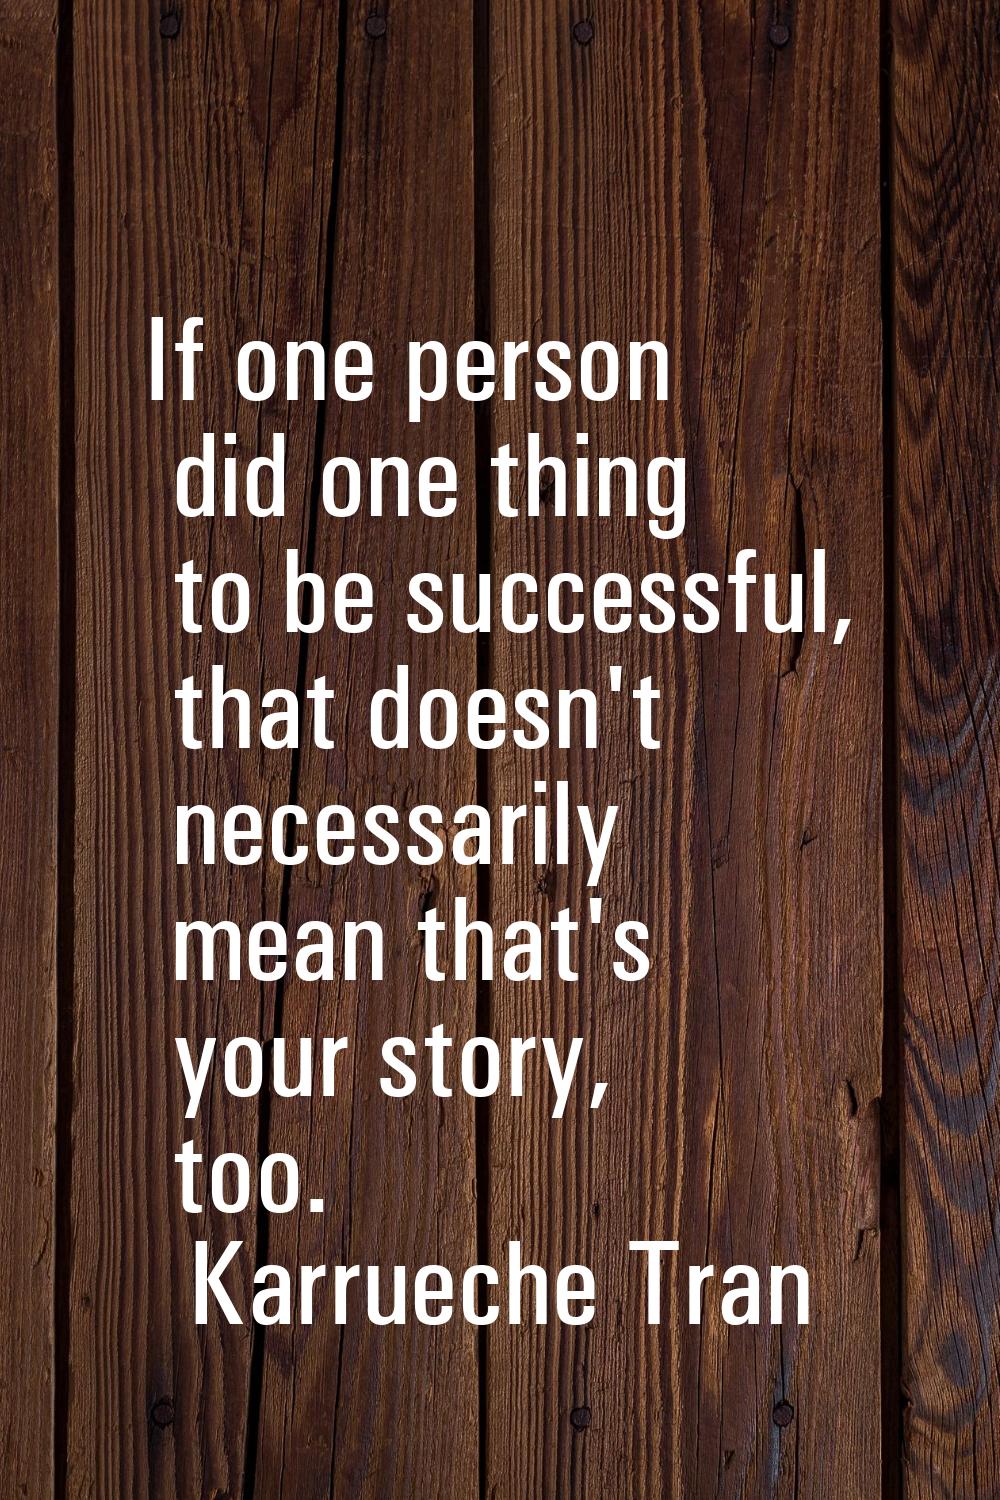 If one person did one thing to be successful, that doesn't necessarily mean that's your story, too.